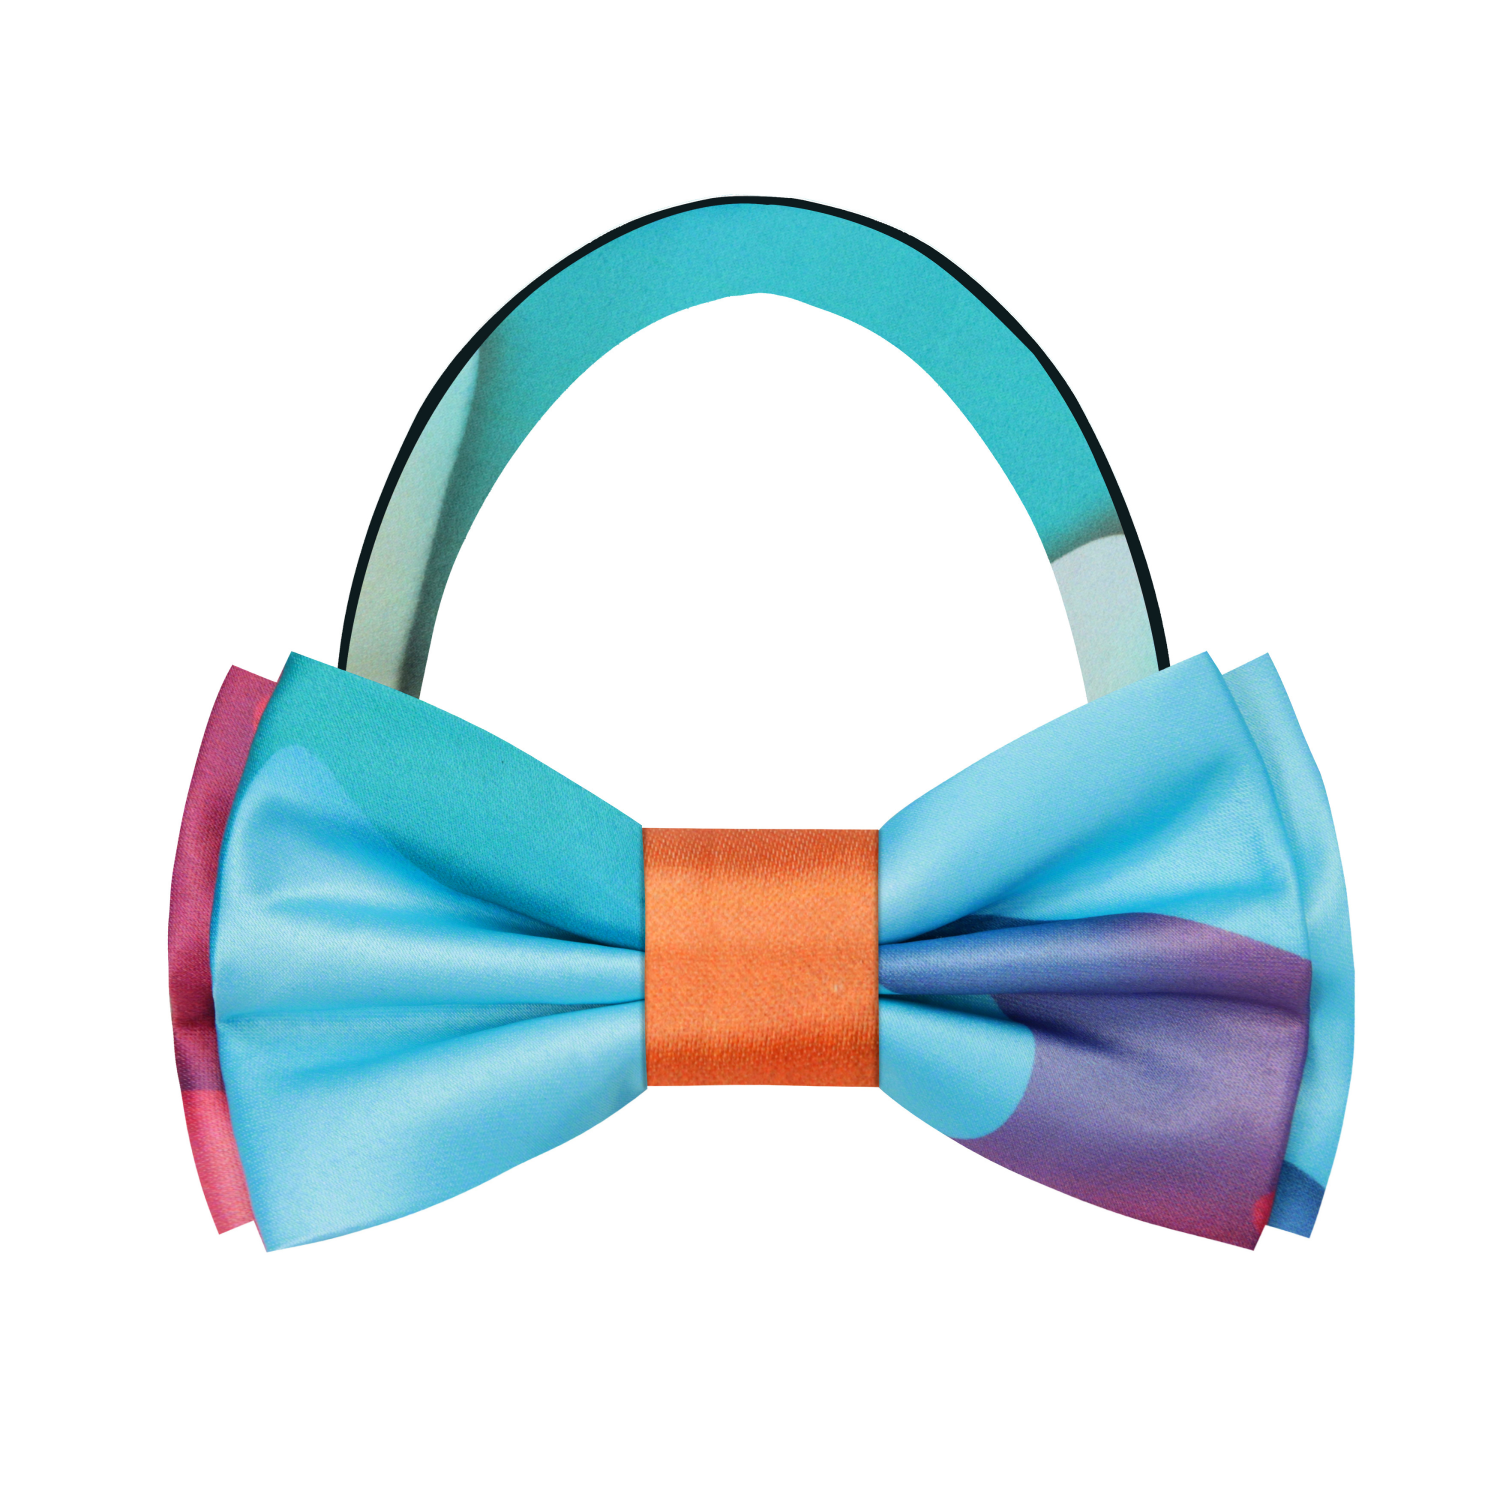 Colorful It’s Melting Bow Tie Pre Tied